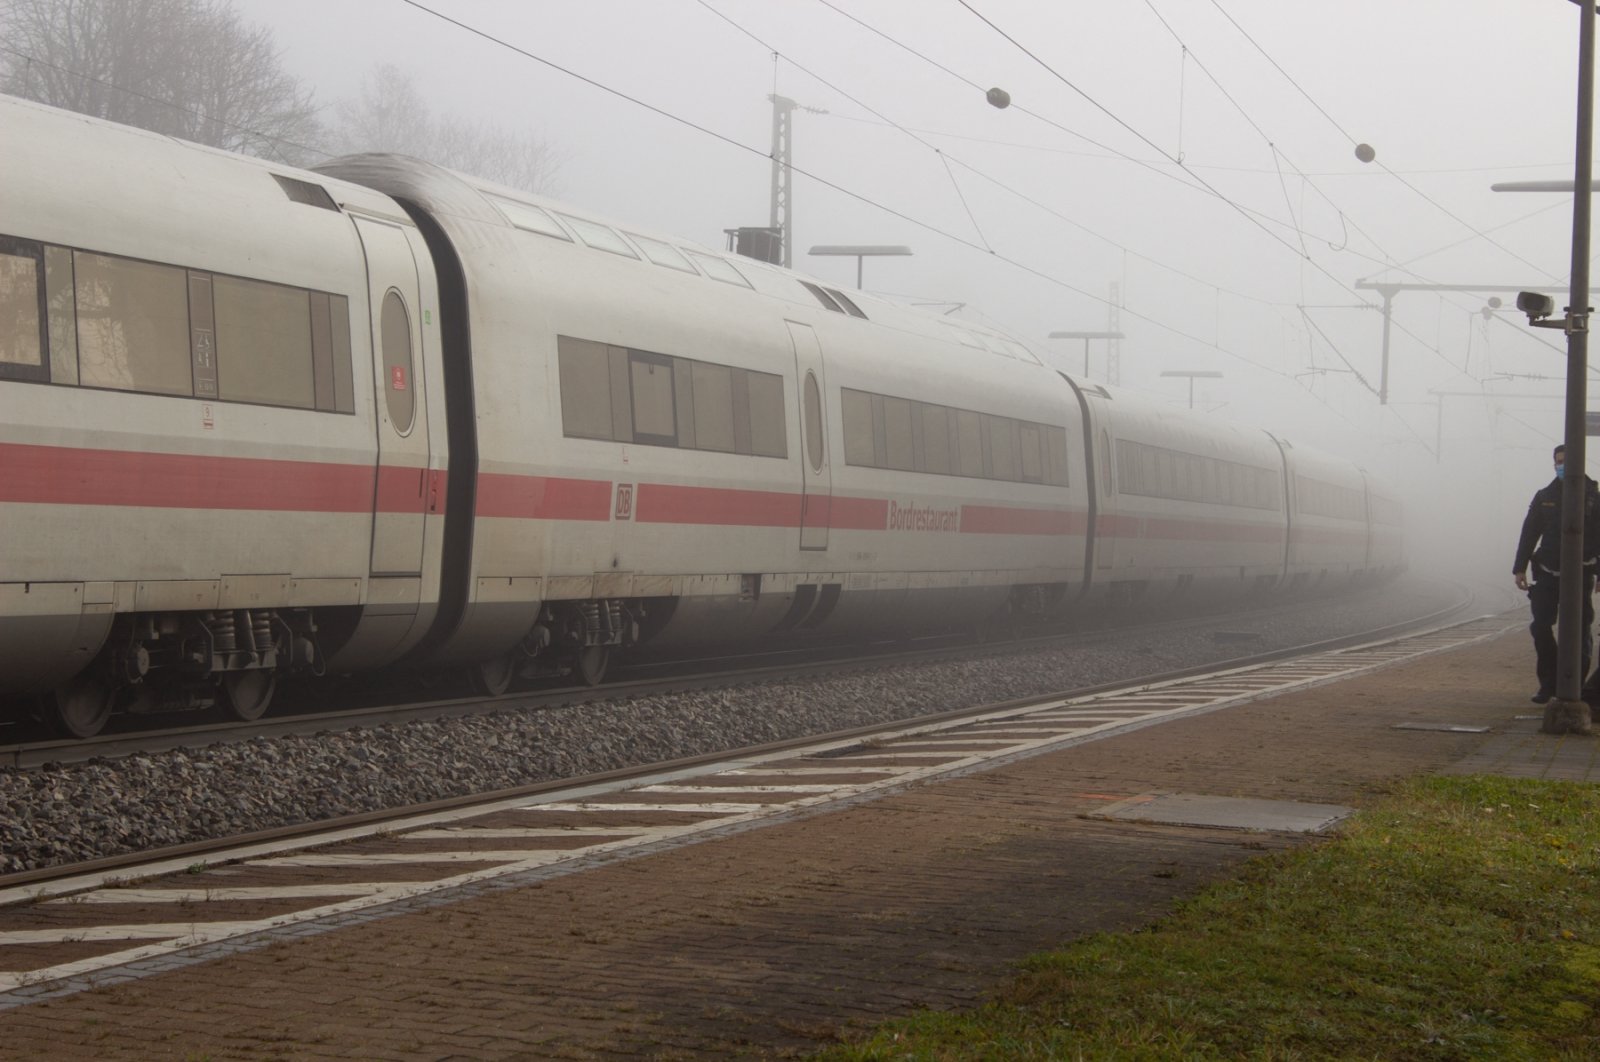 An ICE high-speed train is seen at the train station of Seubersdorf, southern Germany, on Nov. 6, 2021, after several people were wounded in a knife attack on the train. (Photo by dpa / AFP)